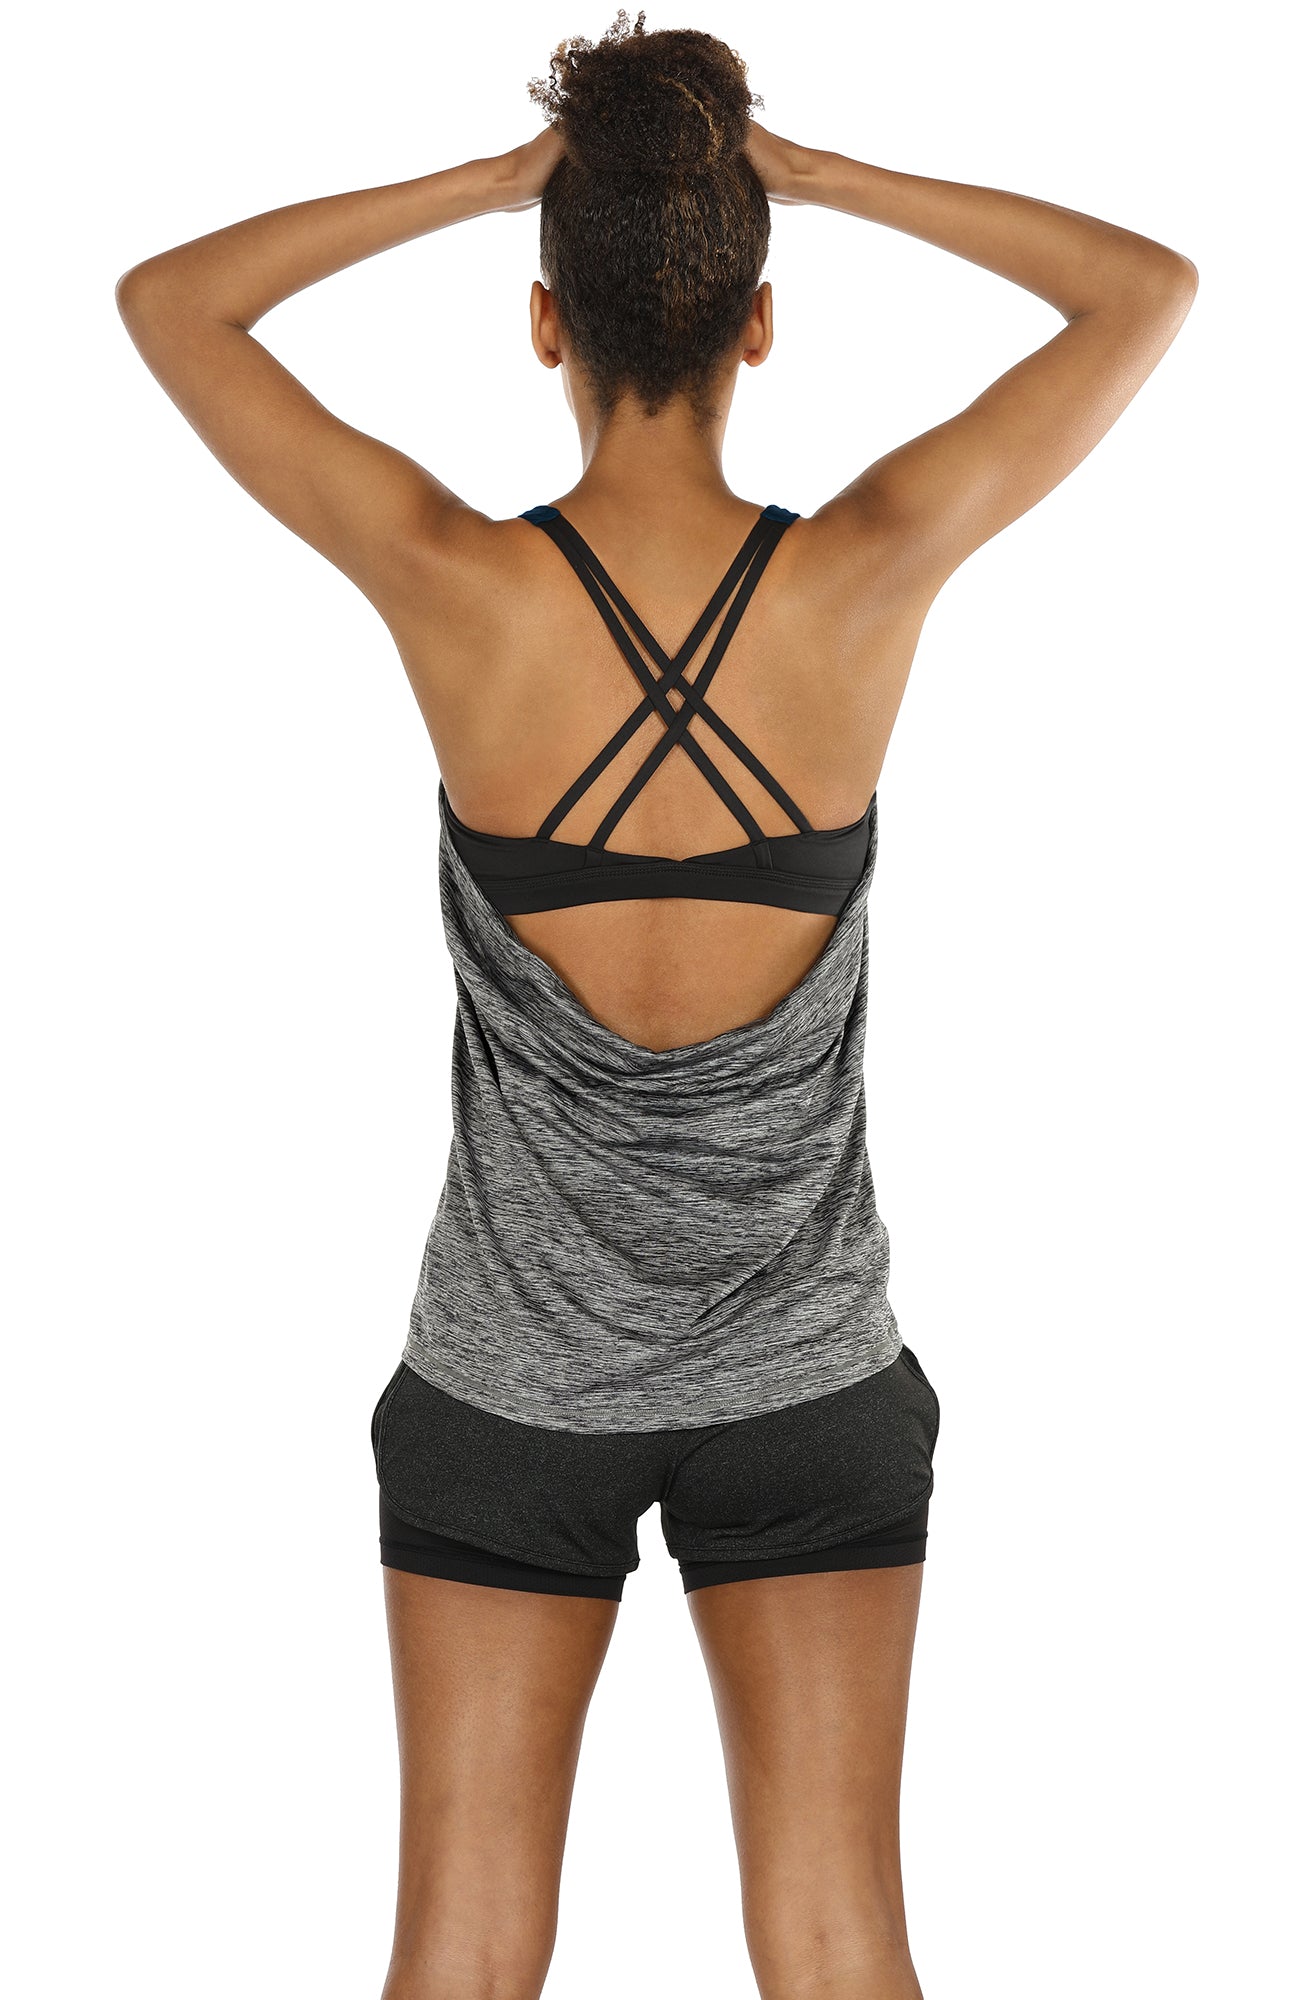 Workout Tank Tops Built In Bra - Women's Strappy Athletic Yoga Tops.  Exercise Running Gym Shirts